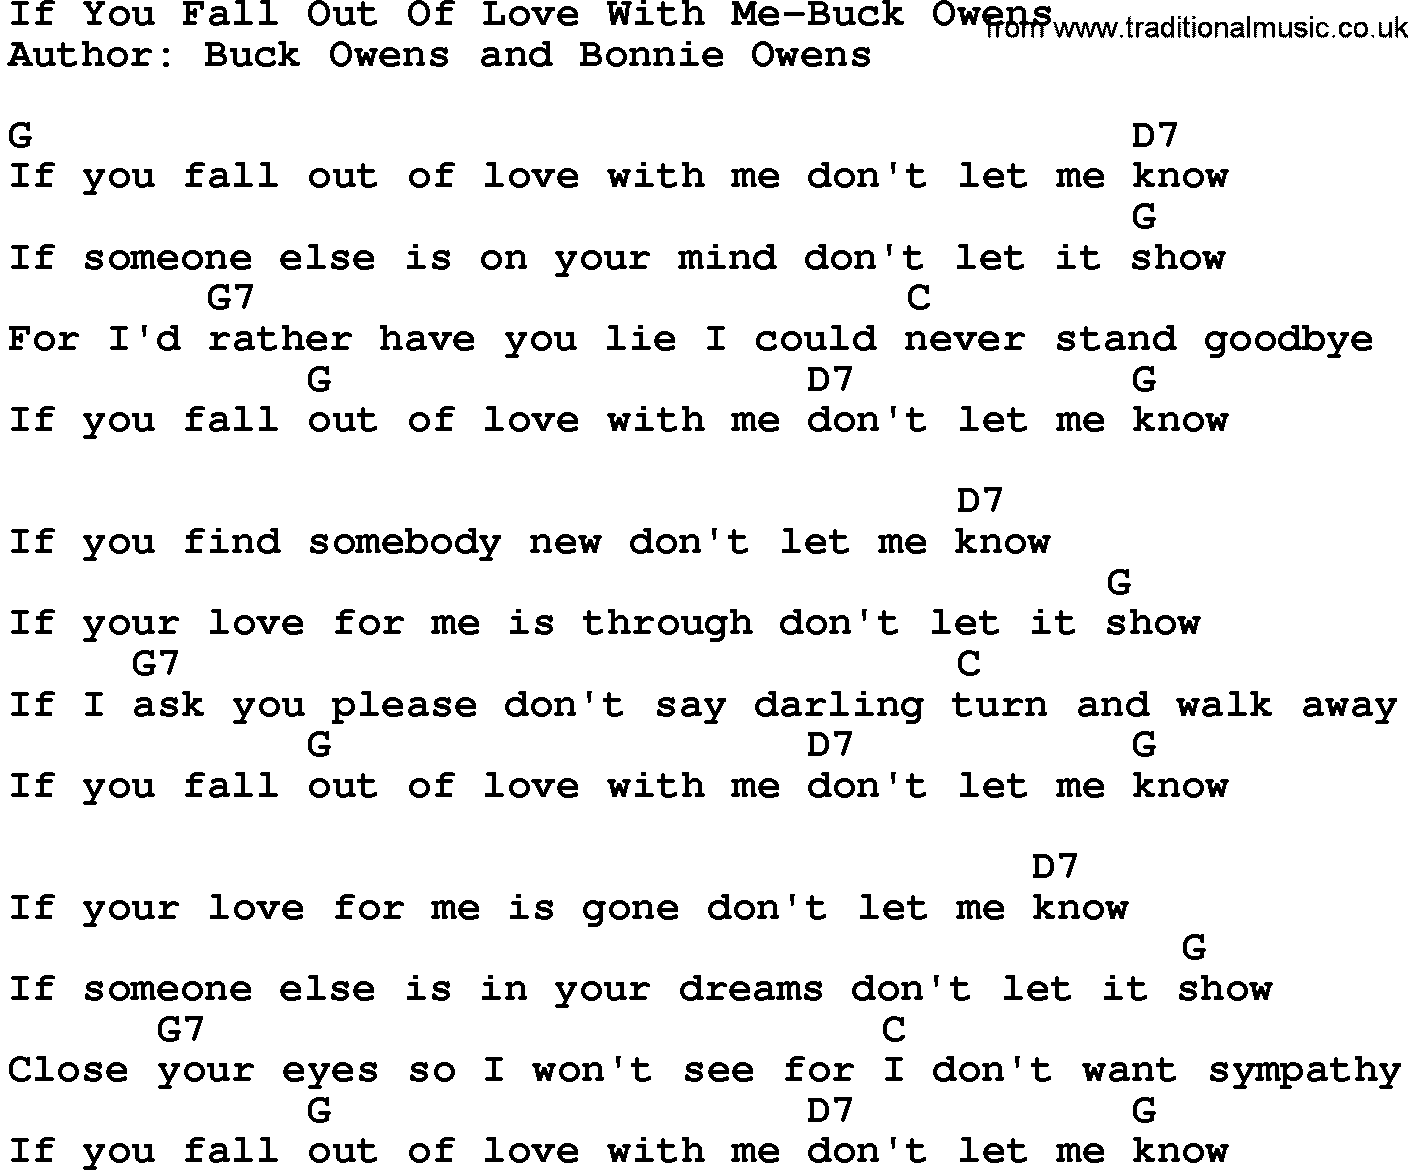 Country music song: If You Fall Out Of Love With Me-Buck Owens lyrics and chords